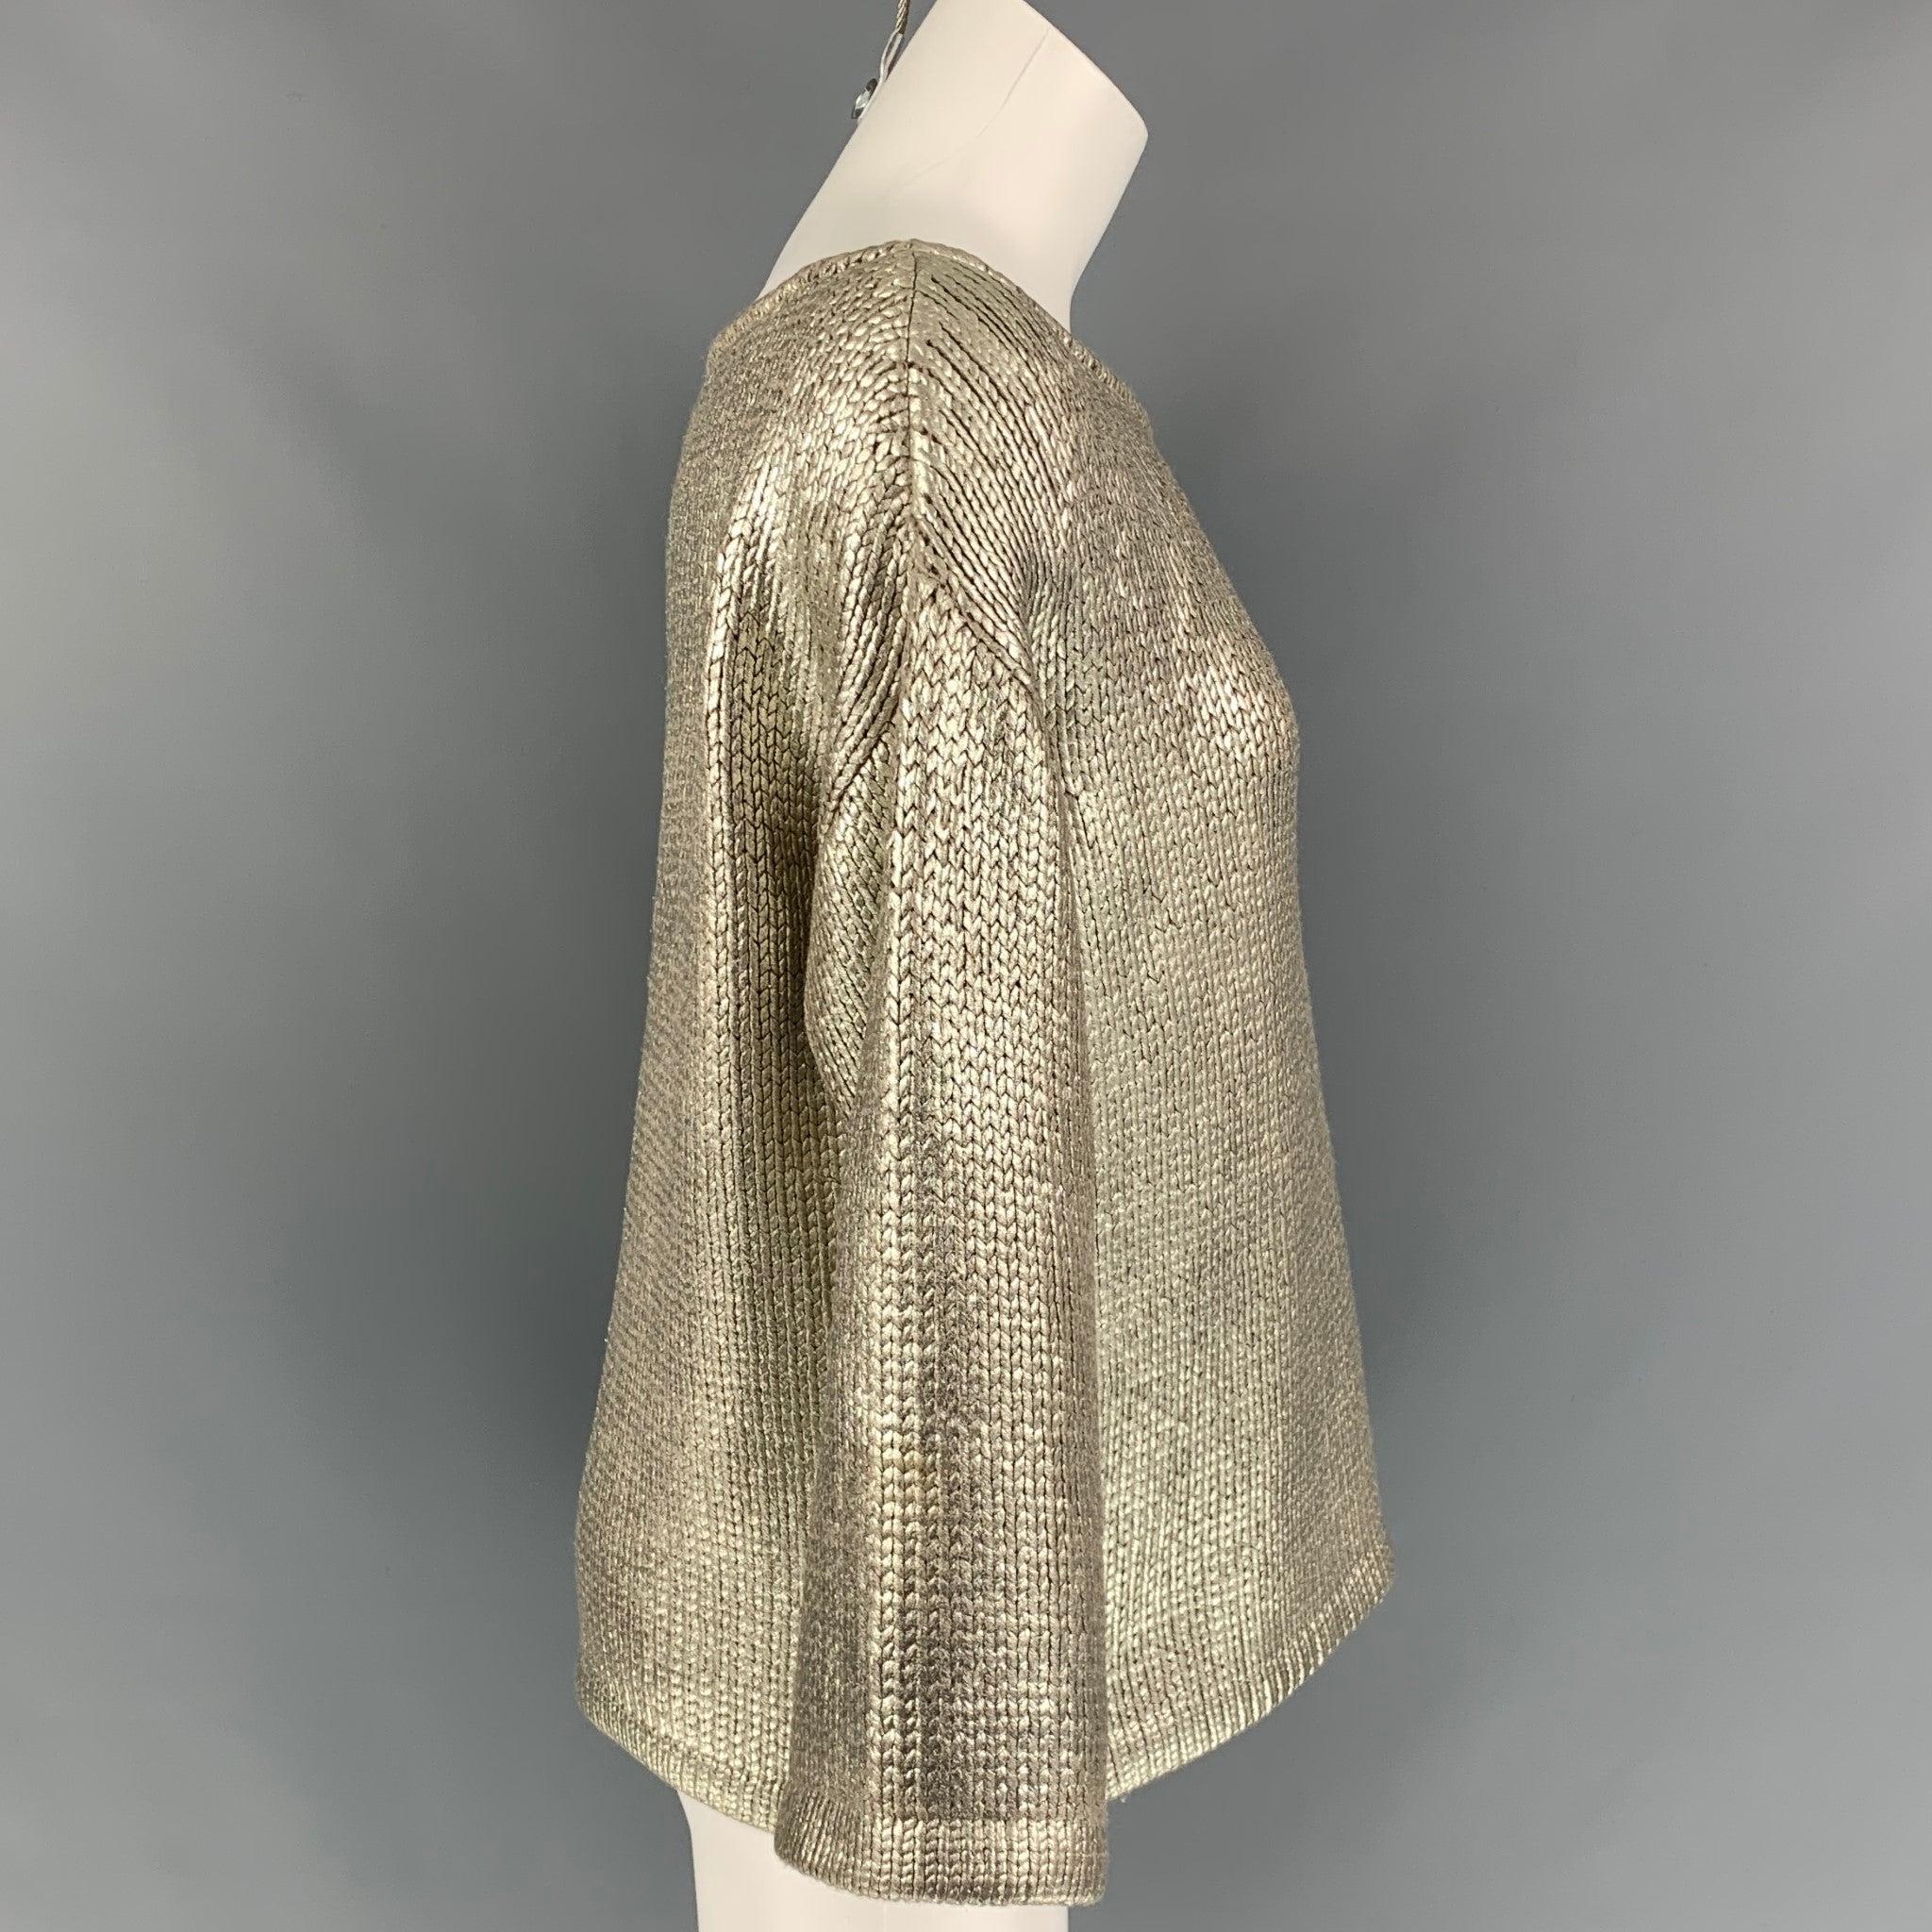 ST. JOHN COUTURE sweater comes in a silver knitted wool featuring a loose fit and a scoop neck. Made in USA.
 Very Good Pre-Owned Condition. 
 

 Marked:  M 
 

 Measurements: 
  
 Shoulder: 21 inches Bust: 42 inches Sleeve: 17.5 inches Length: 22